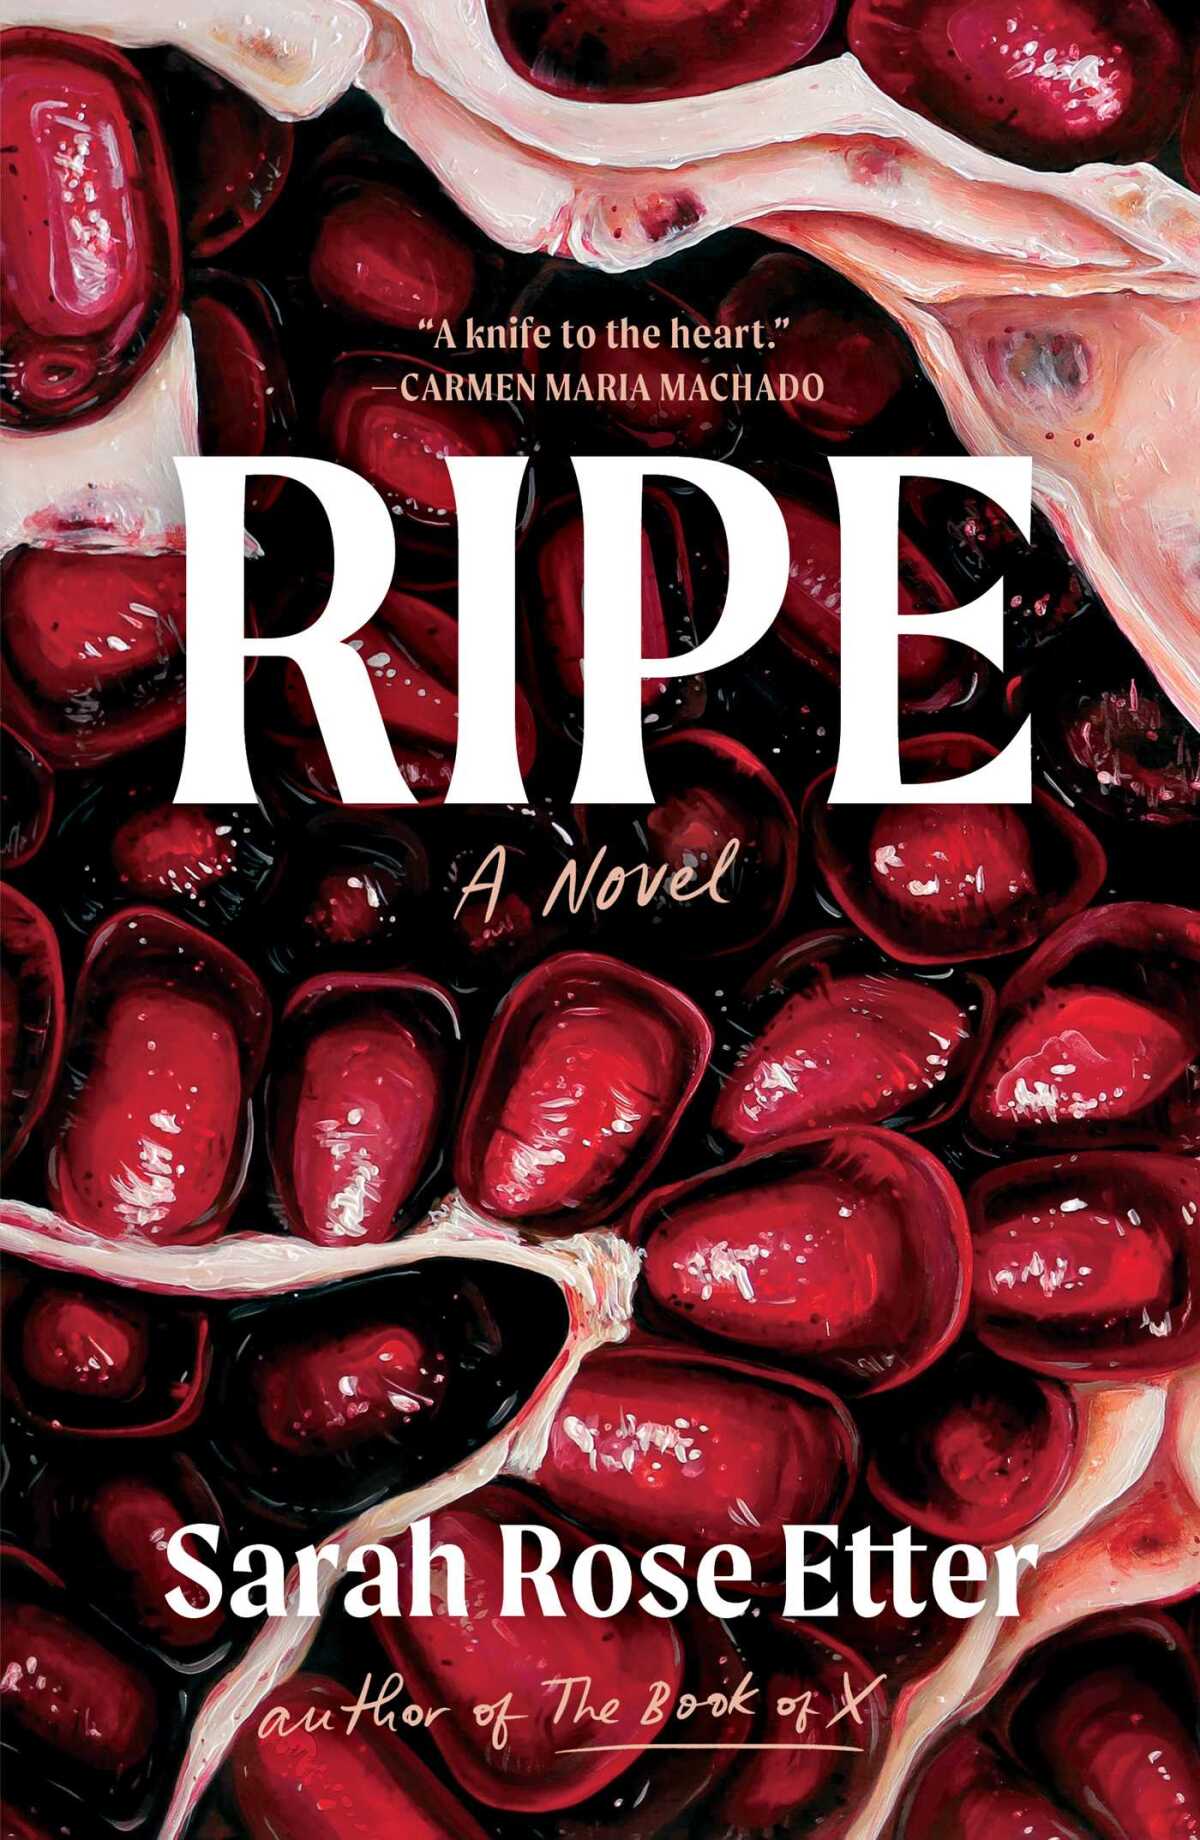 book cover for 'Ripe' by Sarah Rose Etter shows an open pomegranate and its seeds 